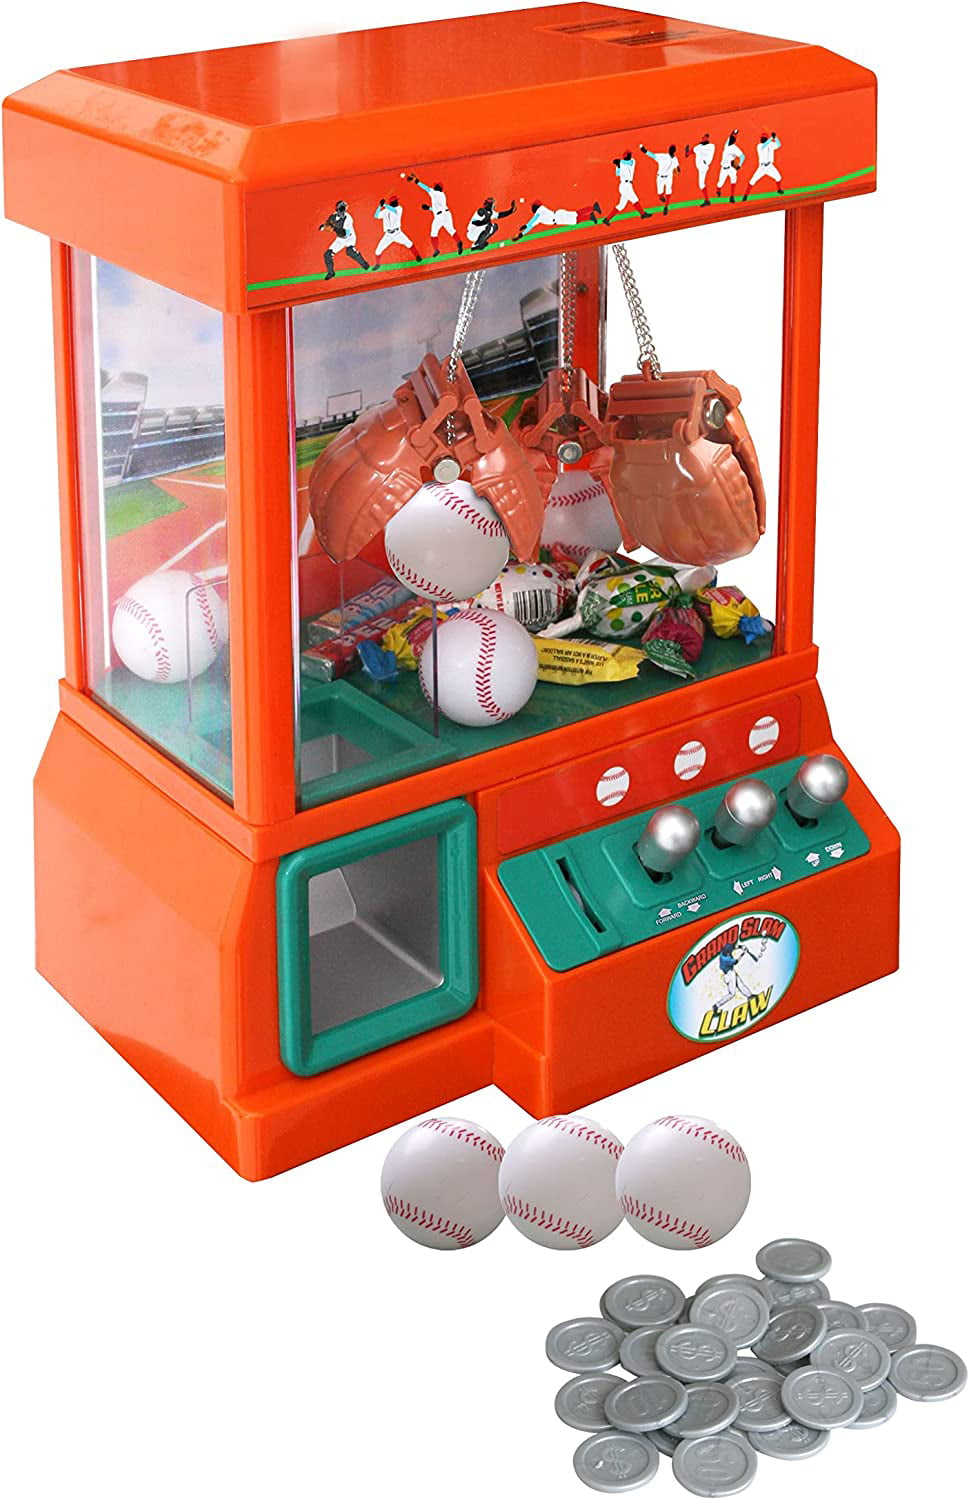 JUXUE Mini Claw Machine for Kids, Arcade Games for Home, Large Candy Claw  Machine with Toys Inside, Vending Machines Toys, Prize Dispenser, Party